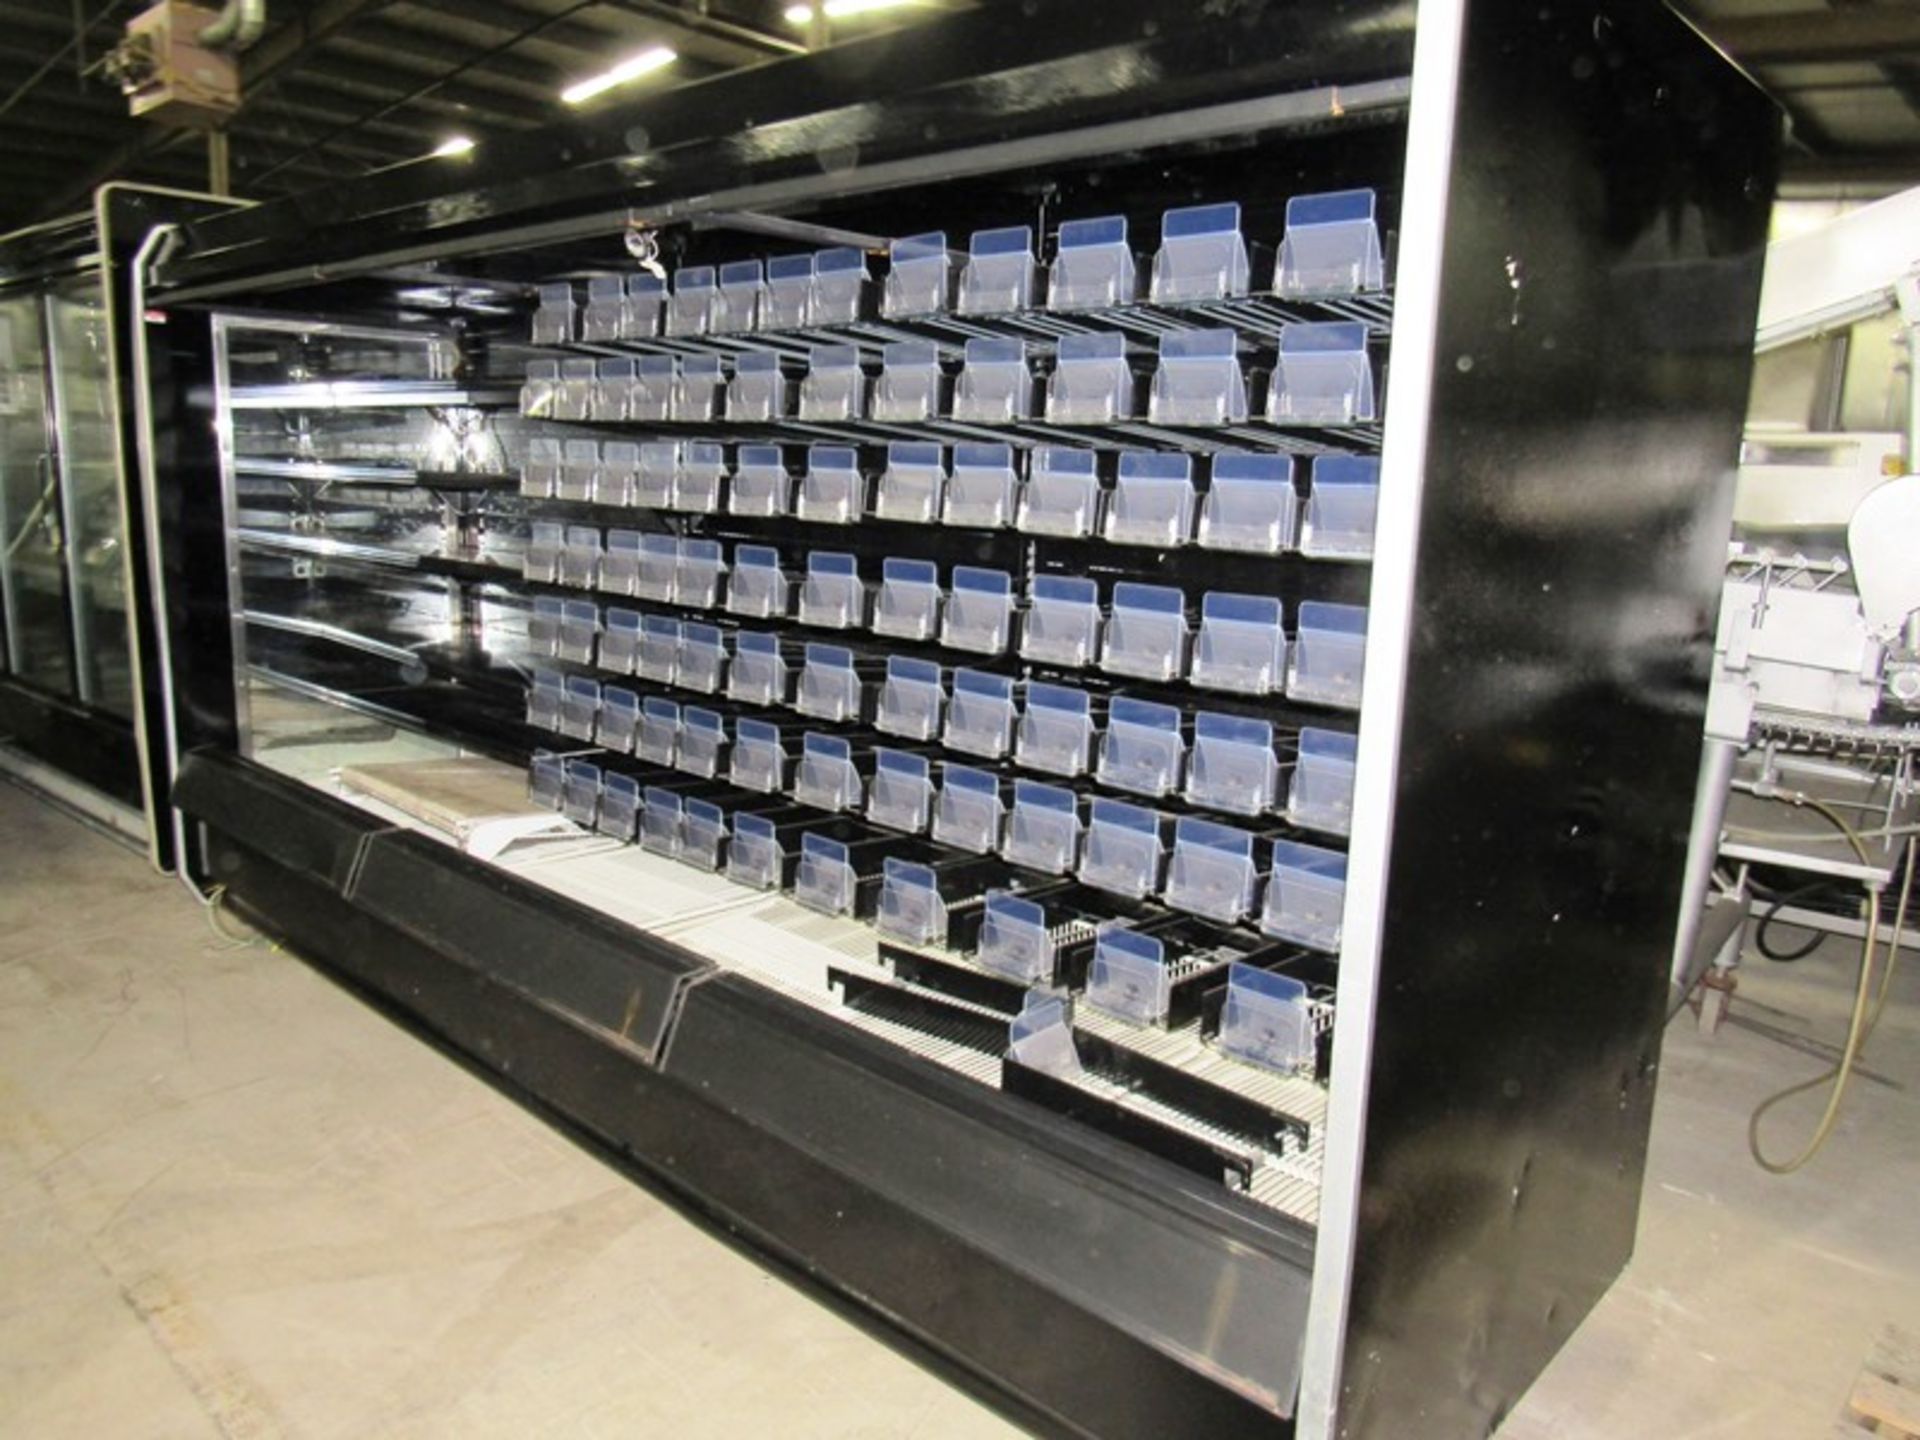 Hussman Refrigerated Reach-In Cooler, 12' long with lights, spring loaded compartments & shelves